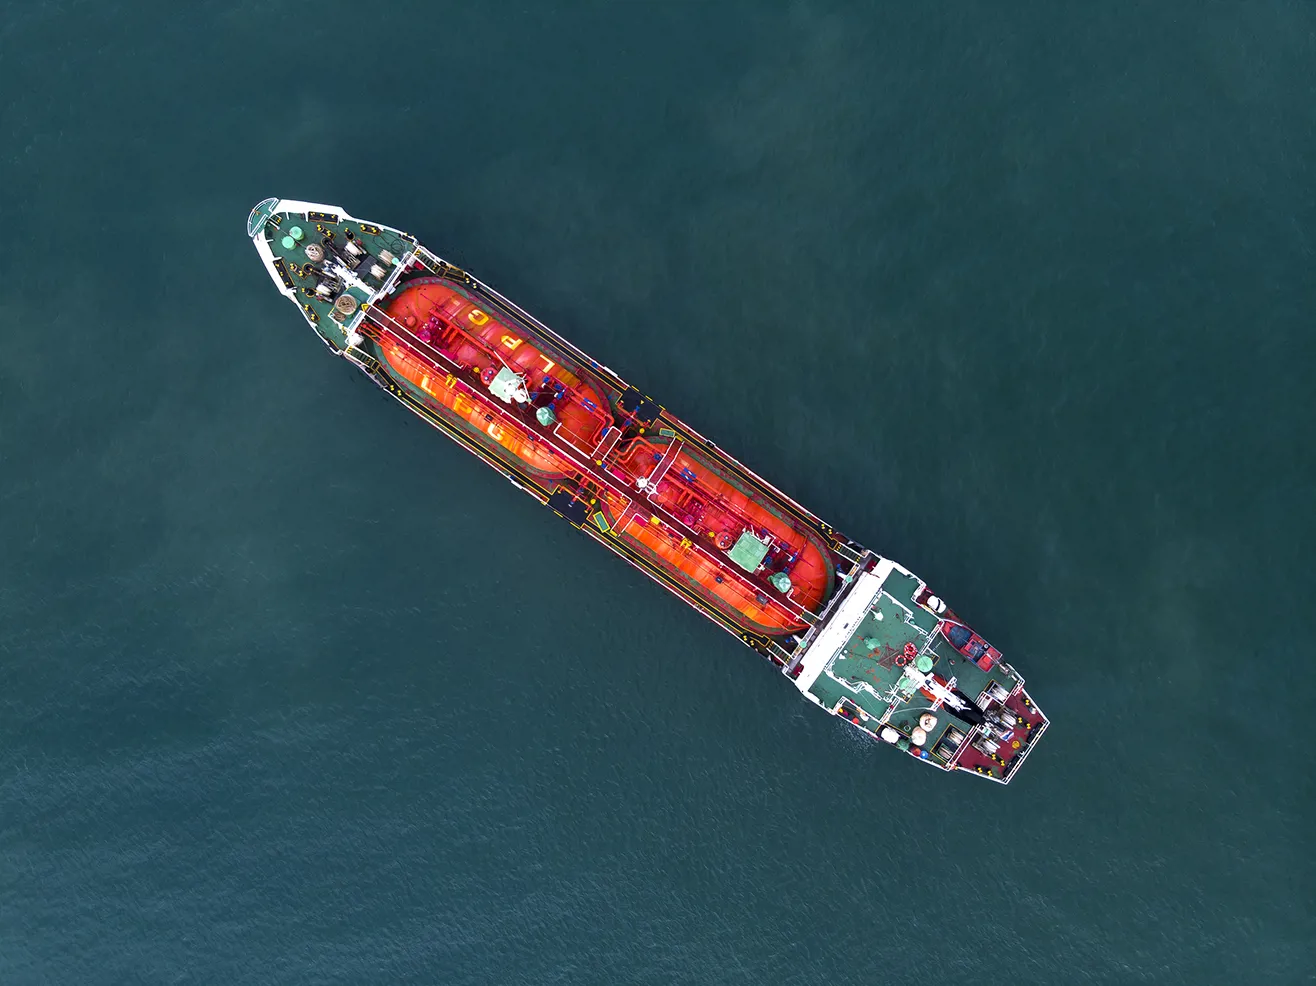 Gas tankers leaving the port to deliver marine energy to the port of destination